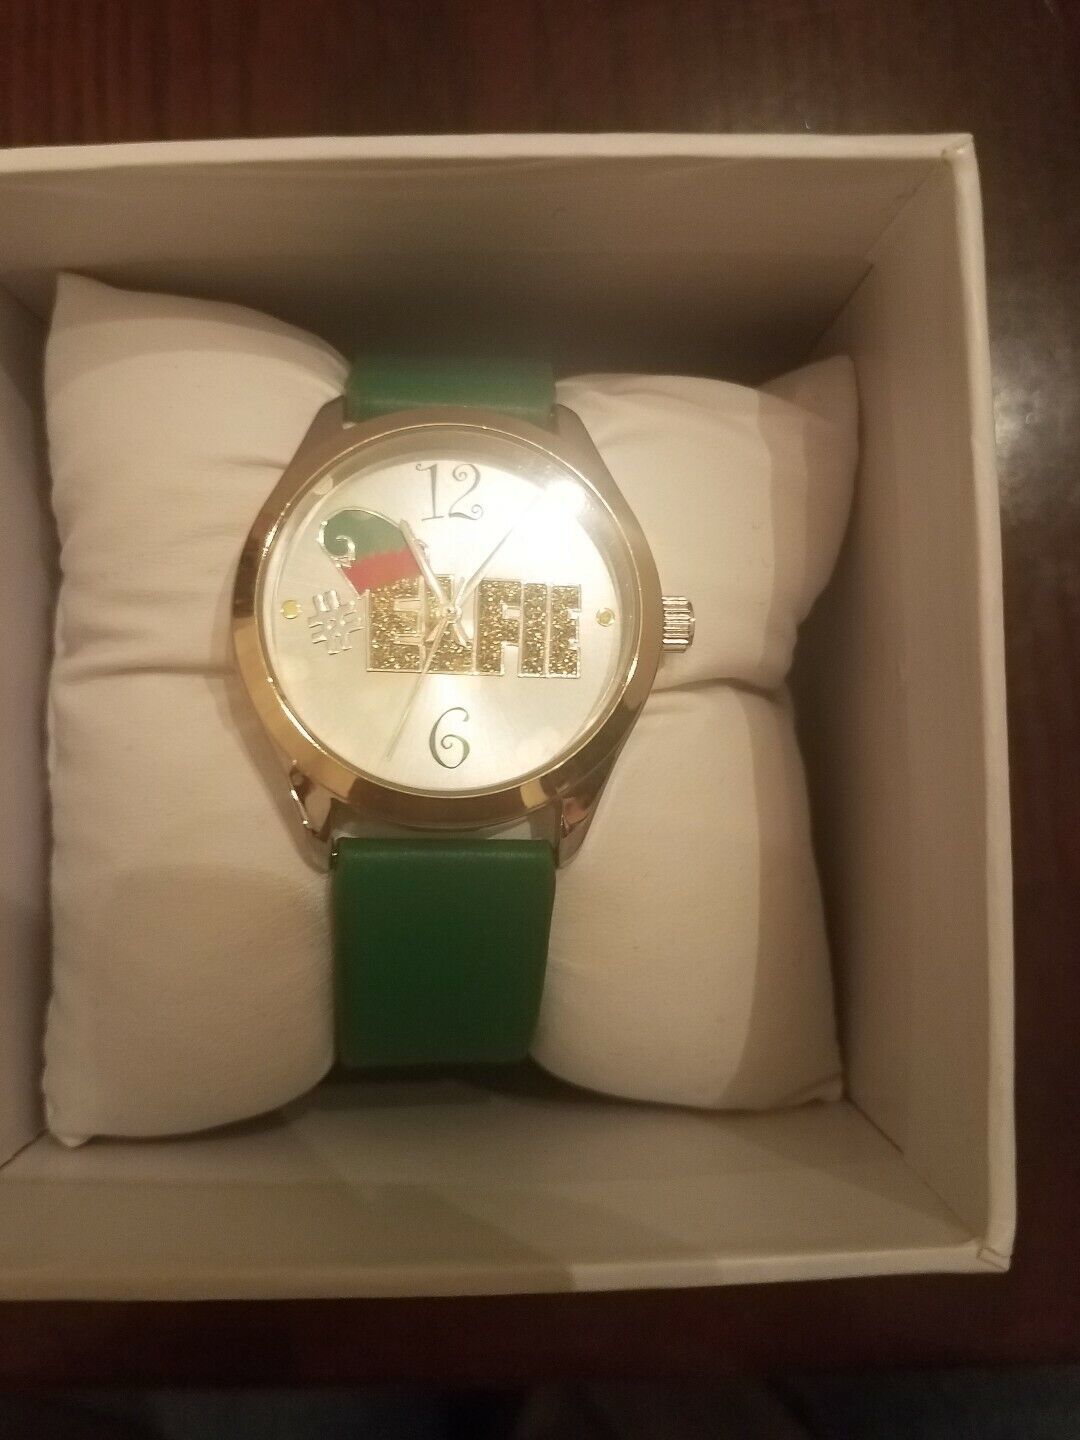 Primary image for Elfie Christmas Watch Holiday Rare Vintage looking Brand New-SHIP SAME BUS DAY